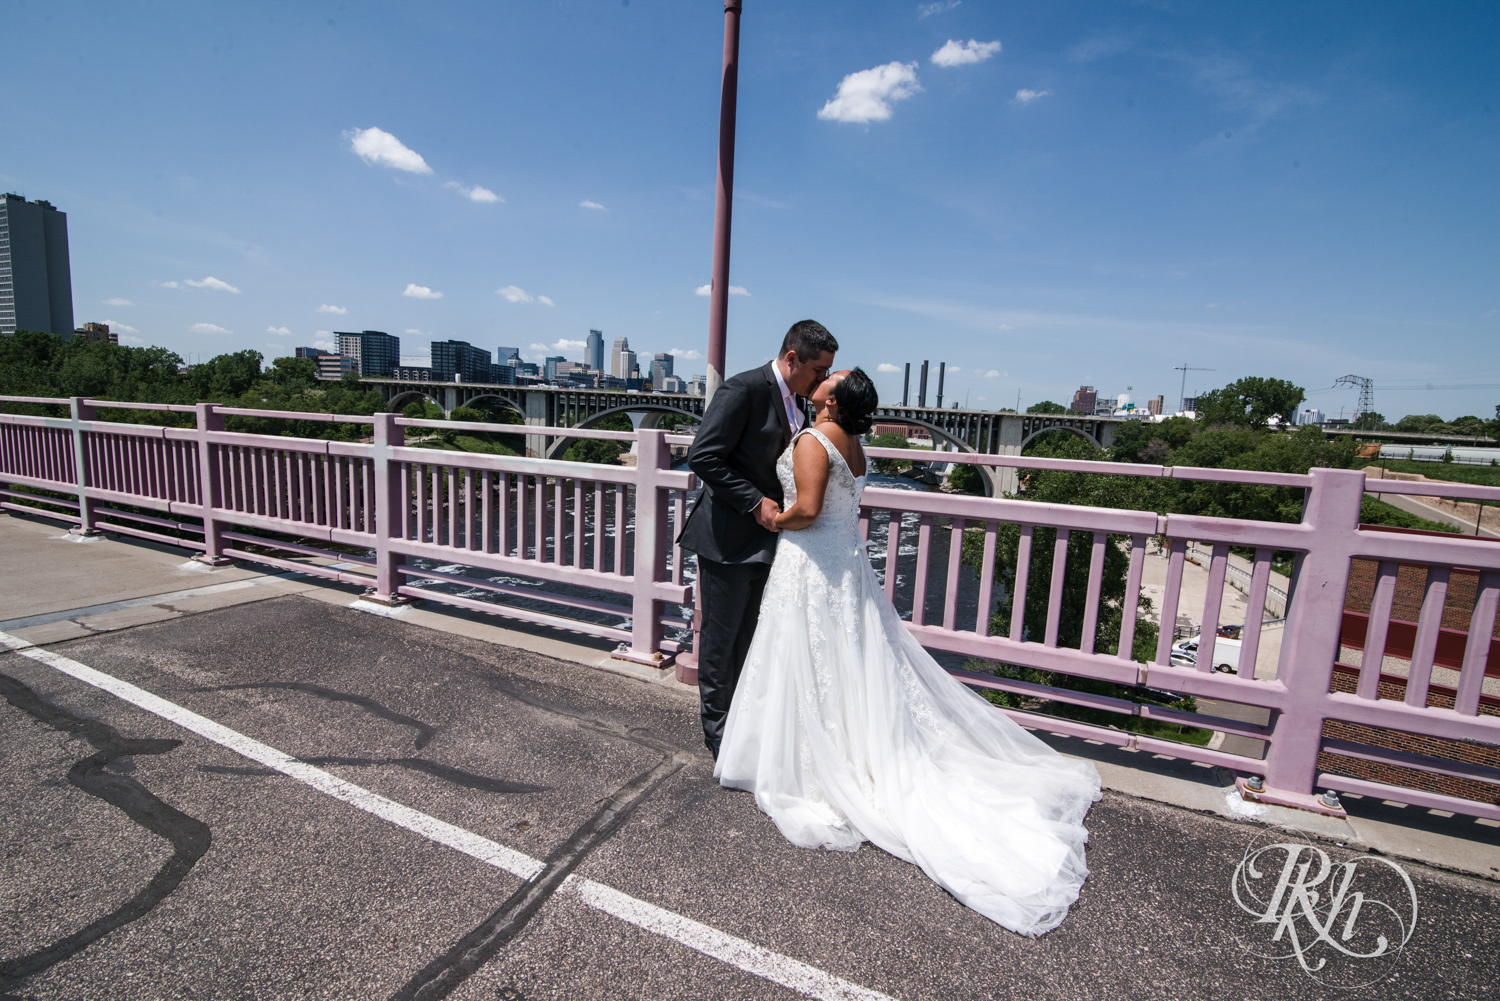 Bride and groom share first look on the 10th Avenue Bridge in Minneapolis, Minnesota.